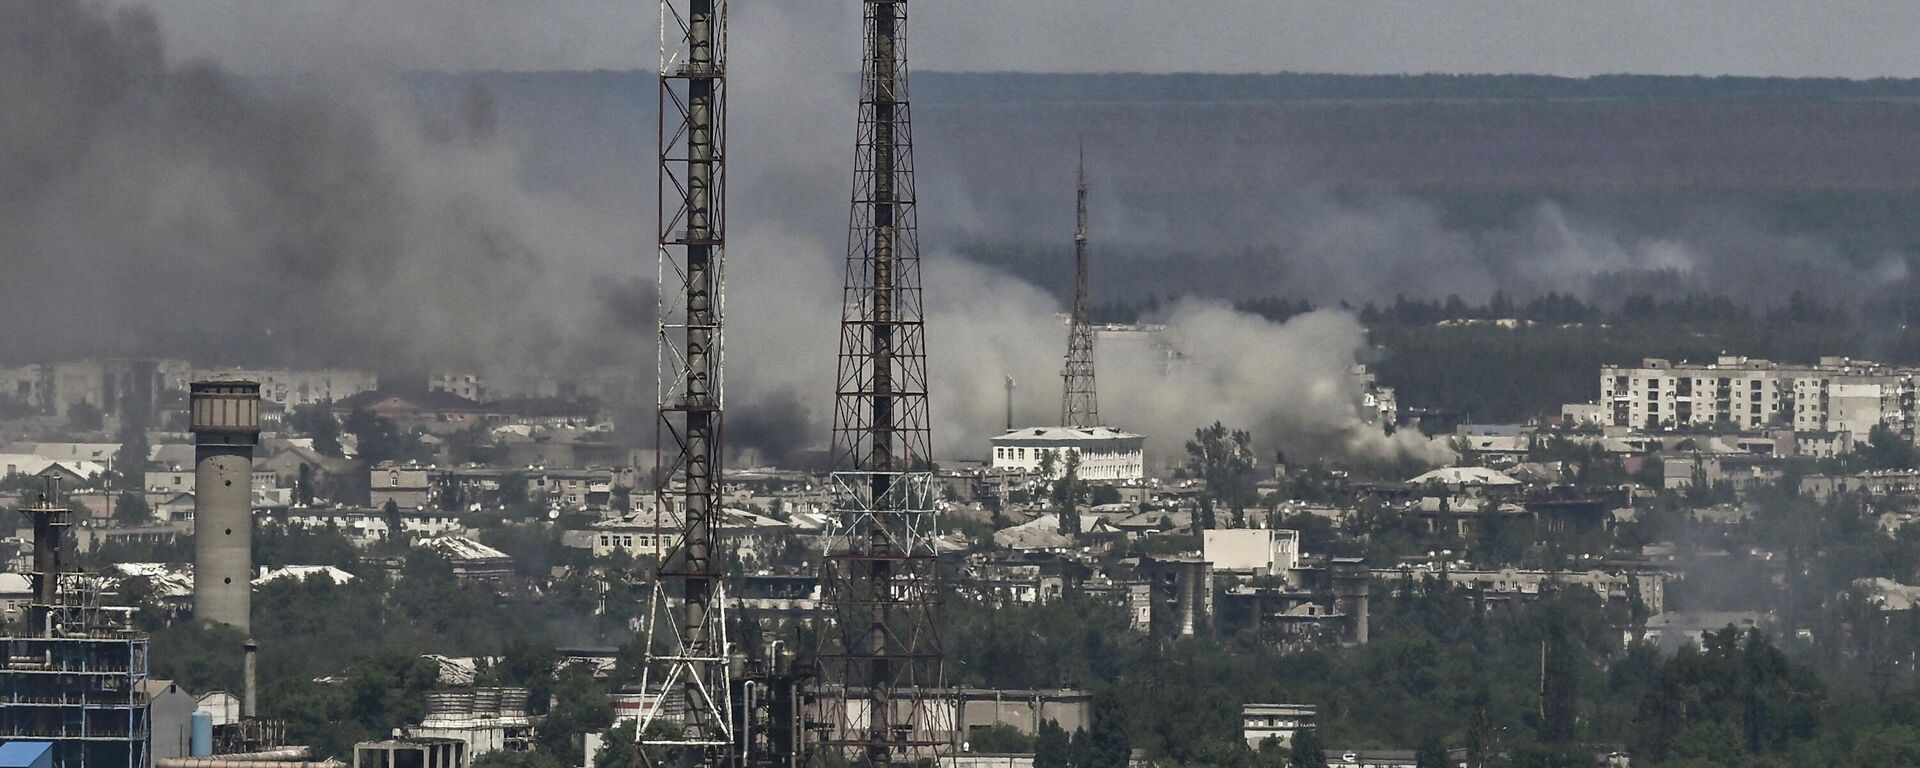 Black smoke and dirt rise from the nearby city of Severodonetsk during battle between Russian and Ukrainian troops in Donbass on 9 June, 2022. - Sputnik International, 1920, 28.06.2022